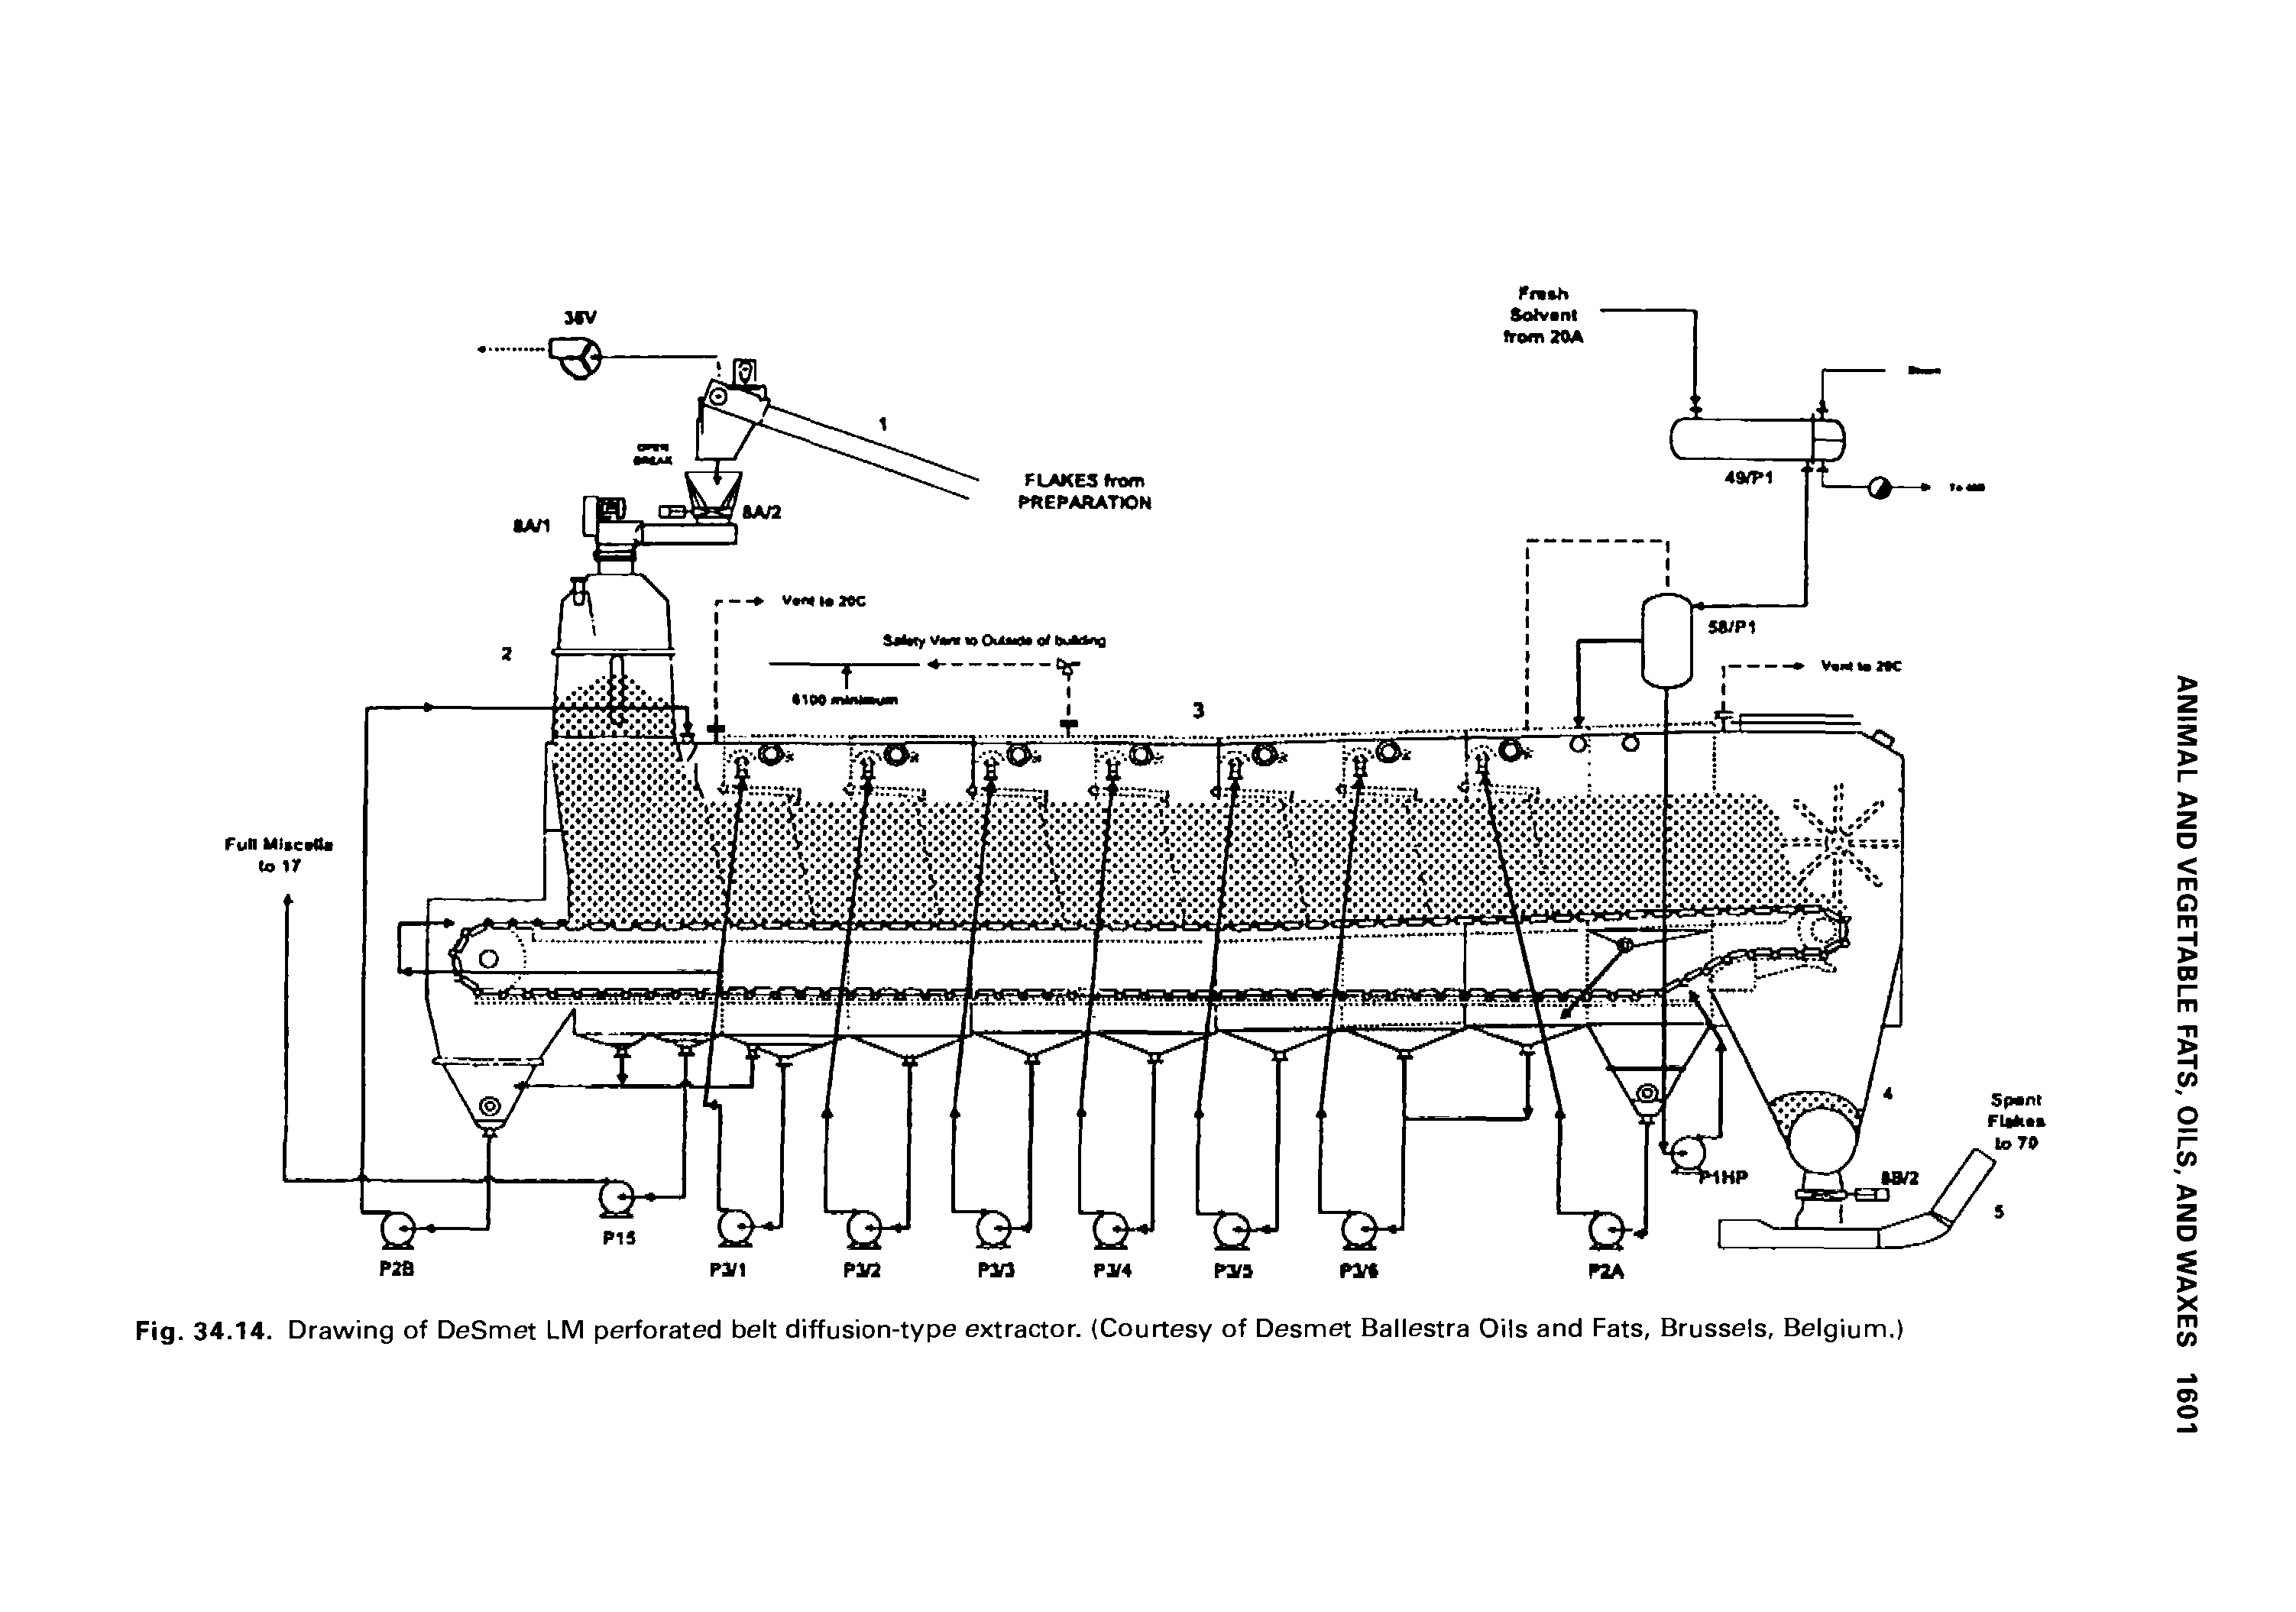 Fig. 34.14. Drawing of DeSmet LM perforated belt diffusion-type extractor. (Courtesy of Desmet Ballestra Oils and Fats, Brussels, Belgium.)...